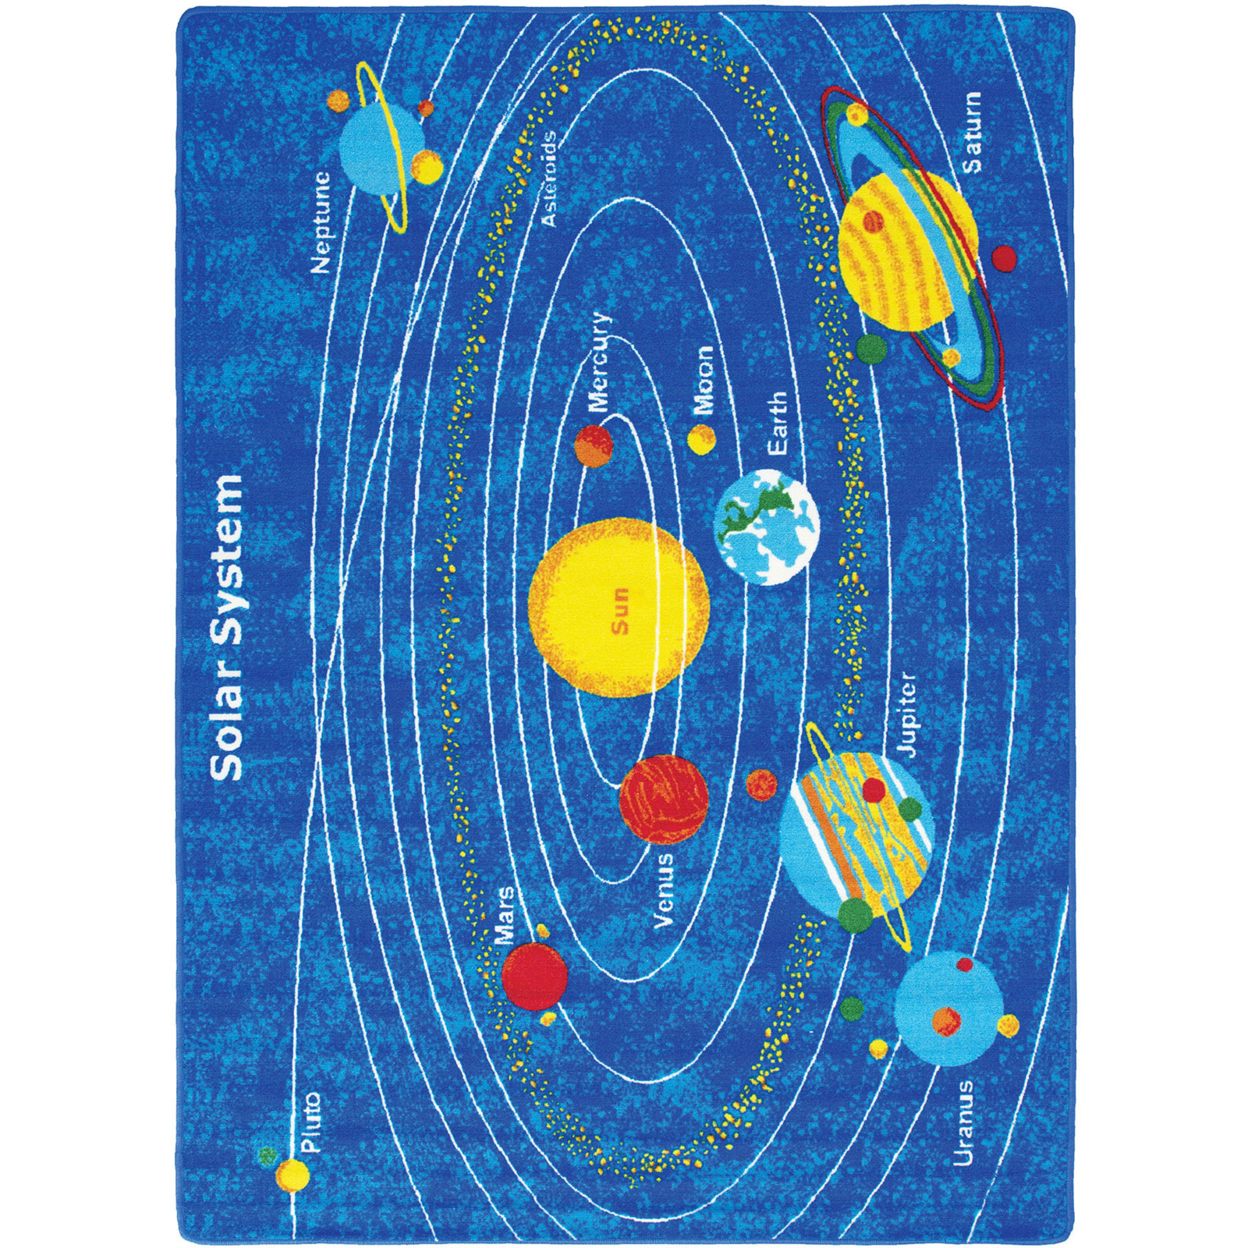 81 X 57 Inches Tufted Loom Kids Room Rug With Solar System Print, Multicolor- Saltoro Sherpi